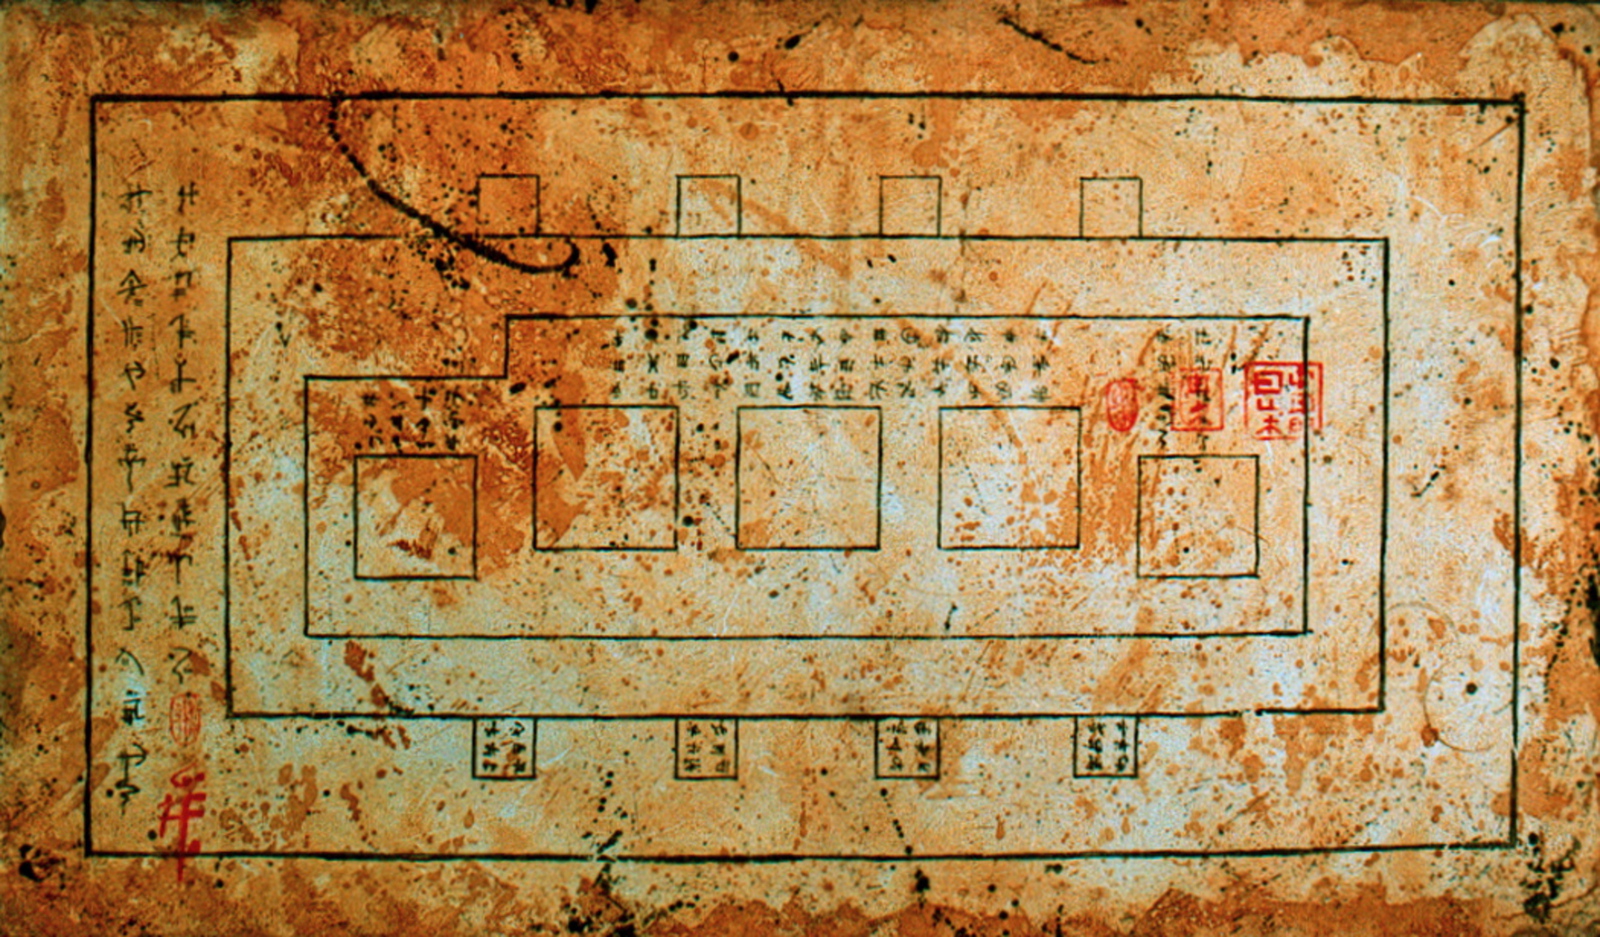 Plan of the Palace of a Zhongshan King